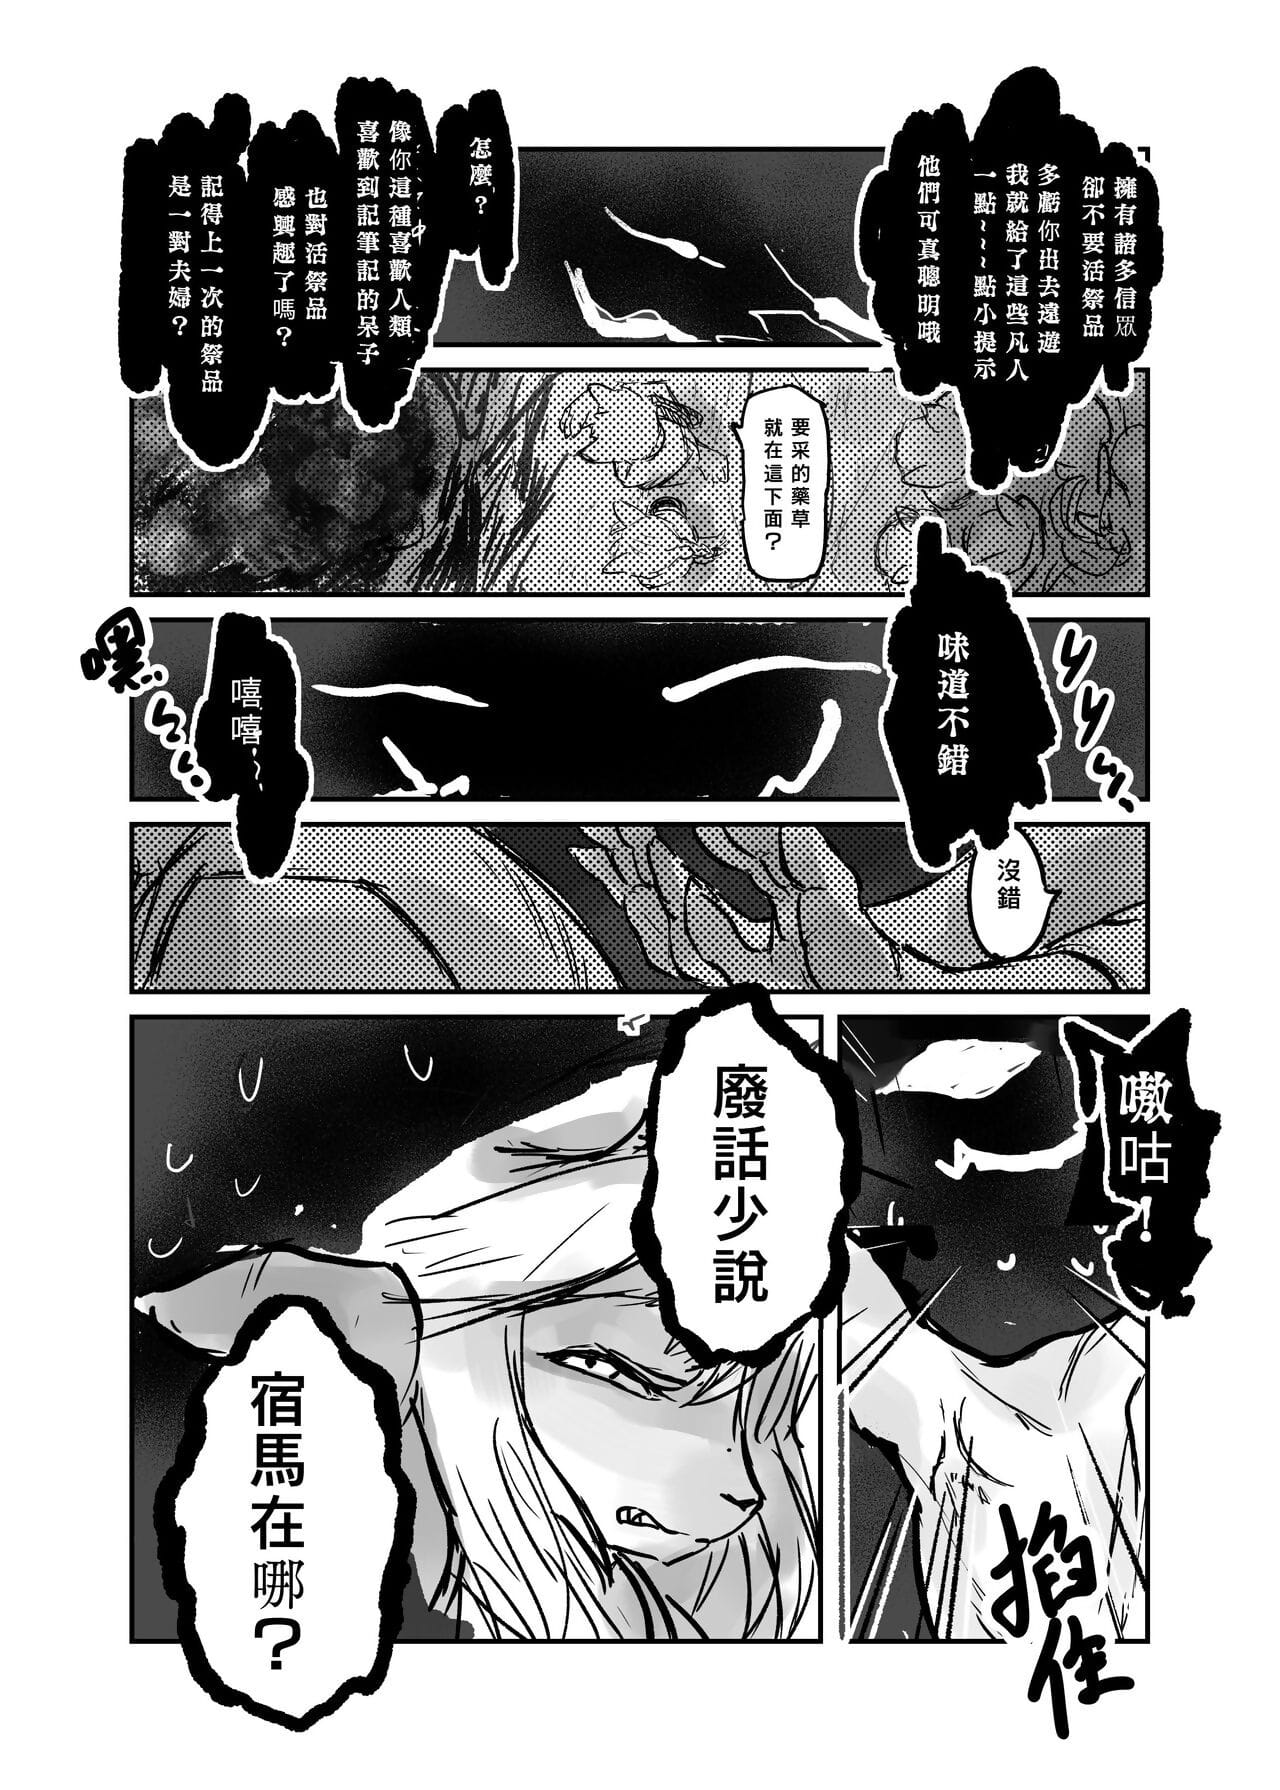 （The visitor 他乡之人 by：鬼流 - part 3 page 1